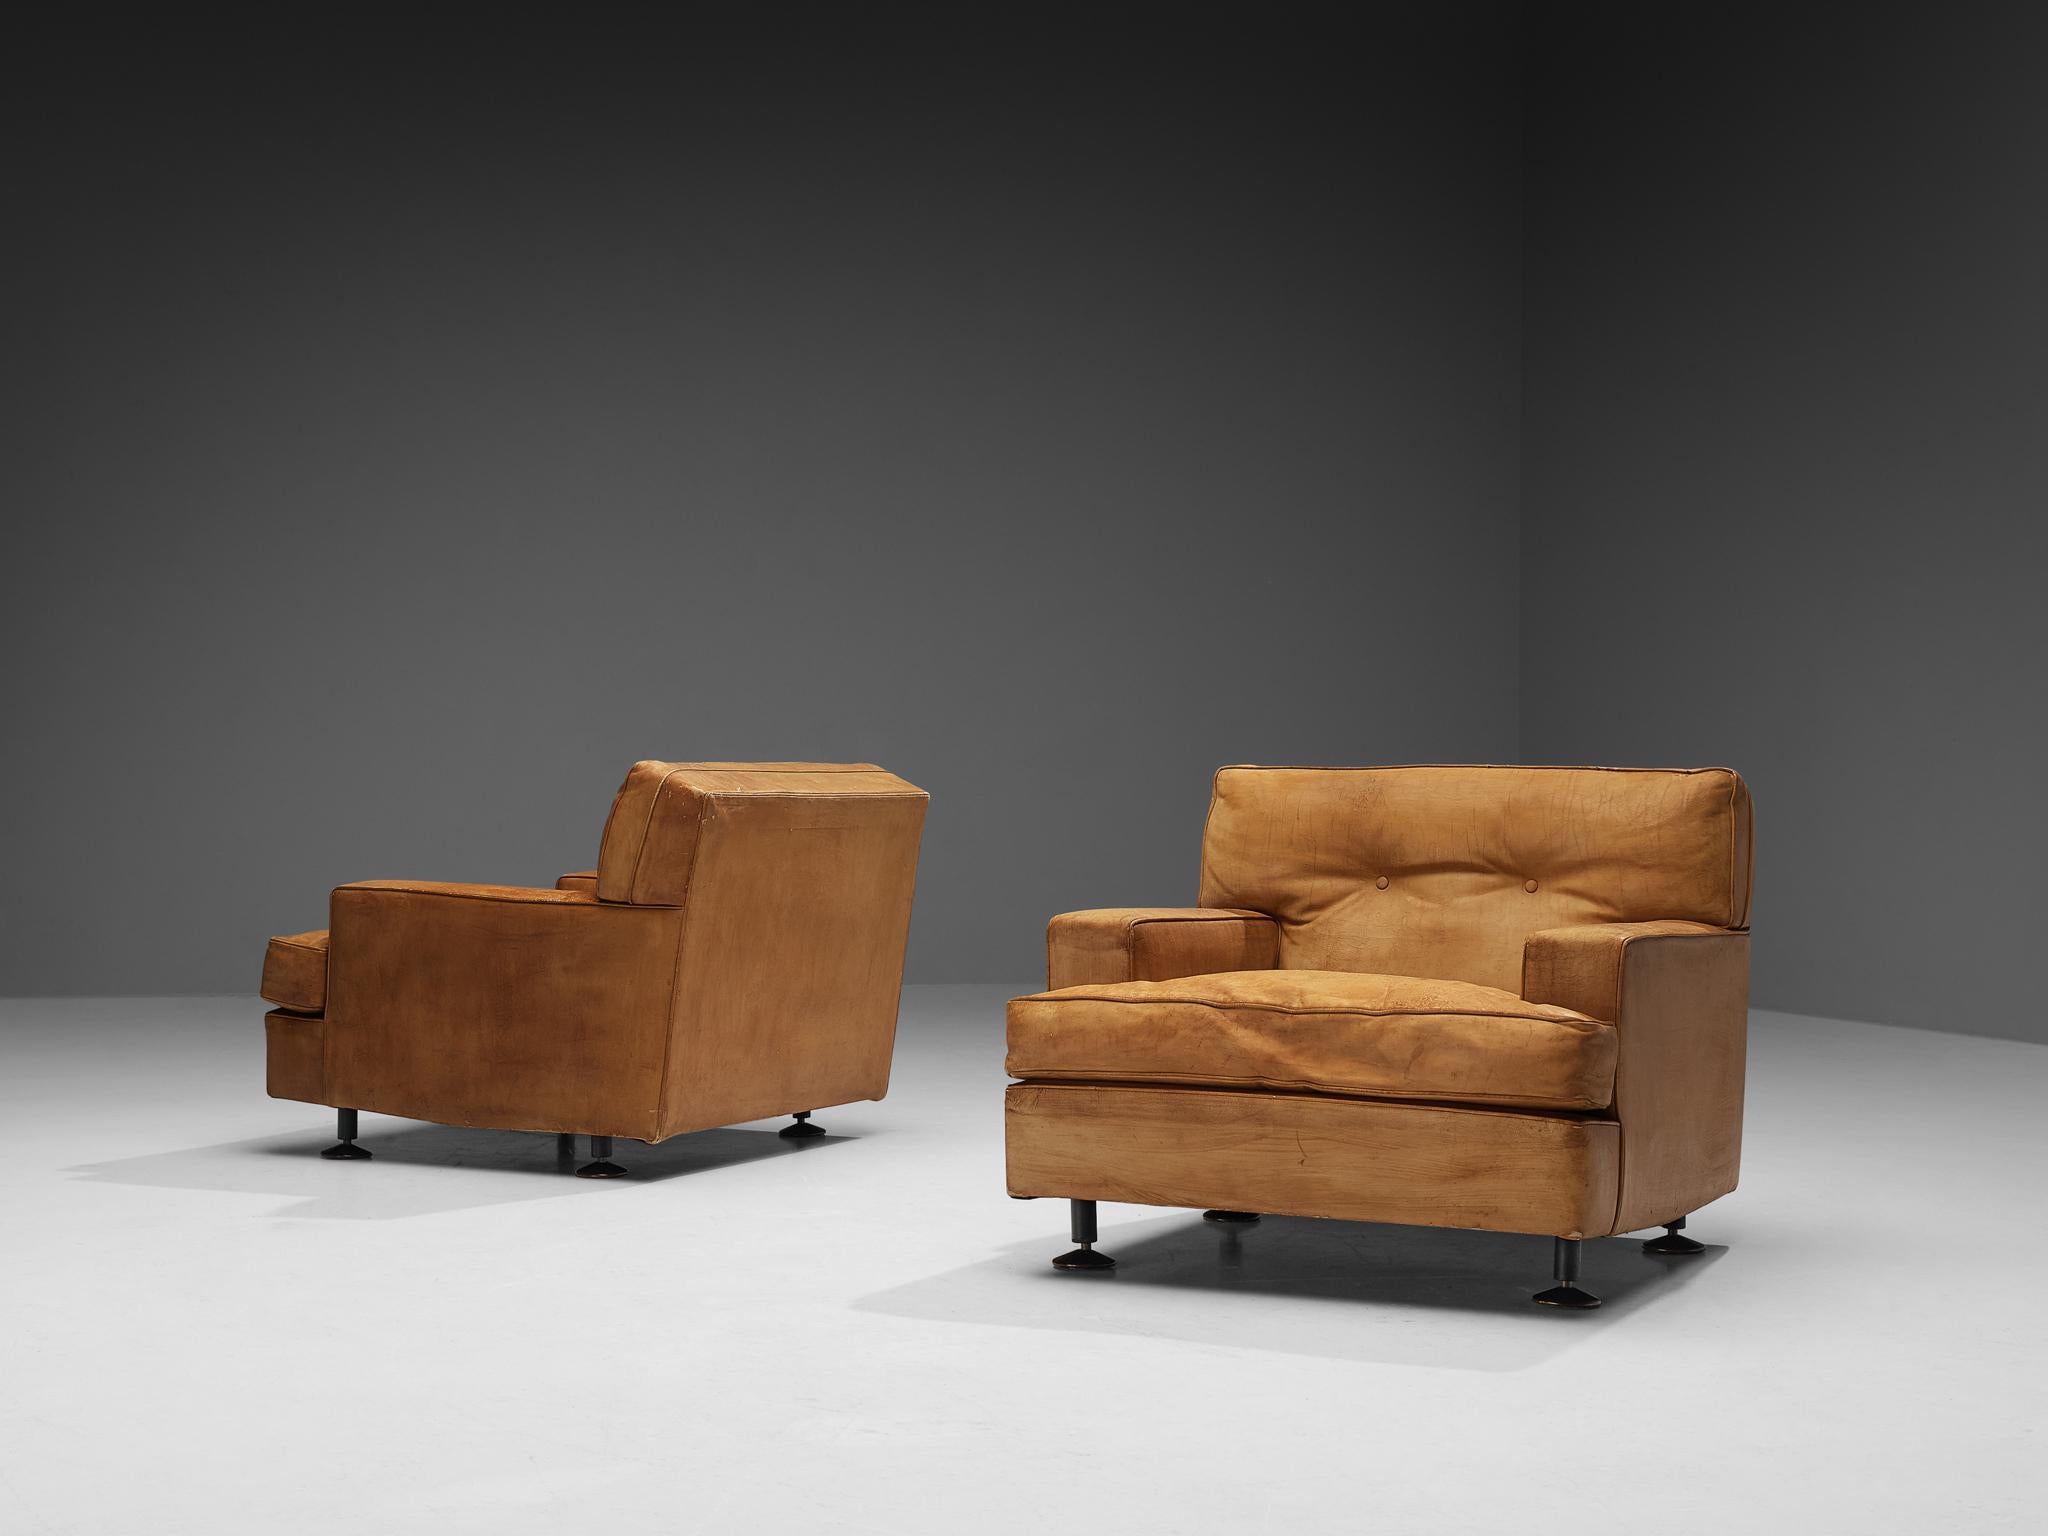 Marco Zanuso for Arflex, pair of ‘square’ lounge chairs, leather, metal, Italy, 1962 

This eccentric pair of club chairs by Marco Zanuso is well-executed embodying a solid construction. Characteristic for this model are the low positioned